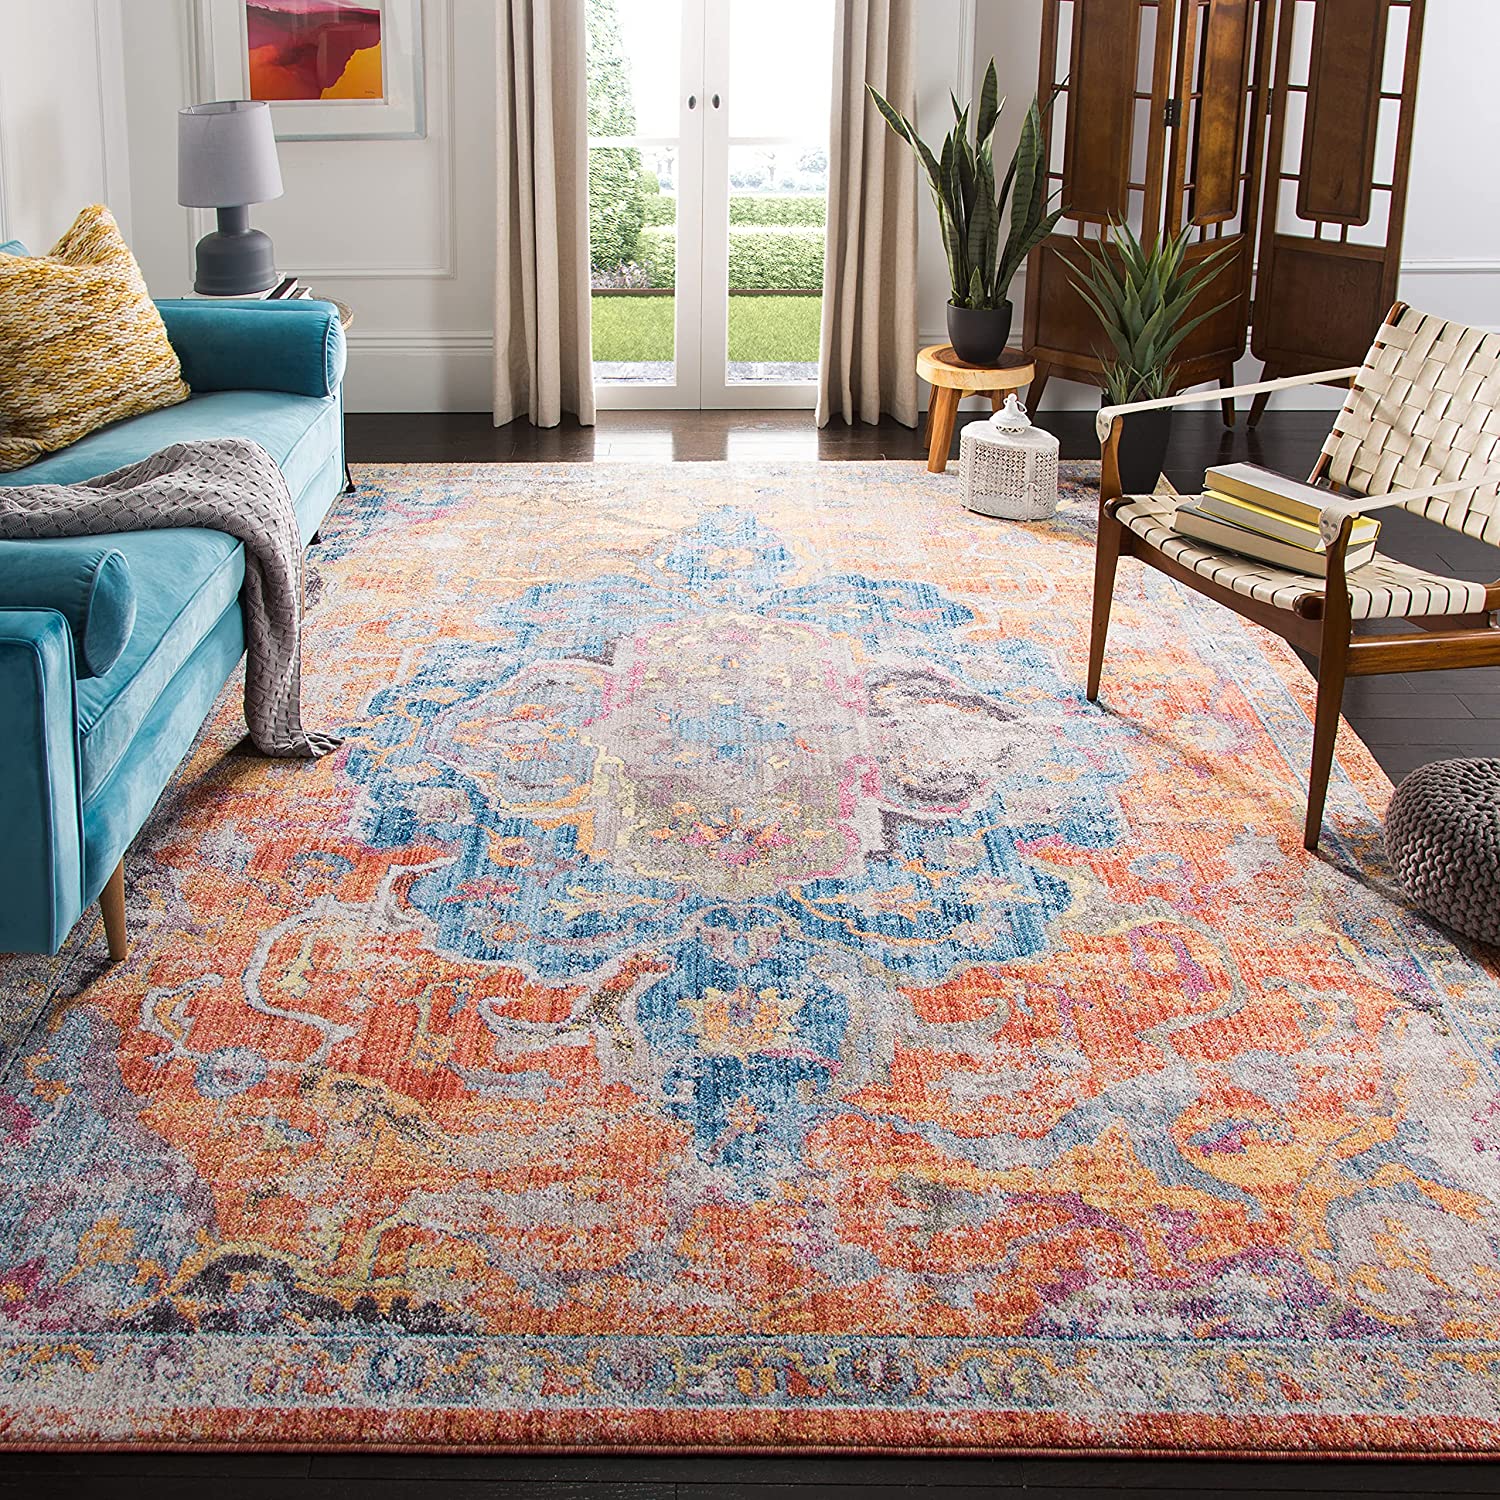 15 Beautiful Rugs That Go With Blue, What Colour Rug Goes With Dark Blue Sofa